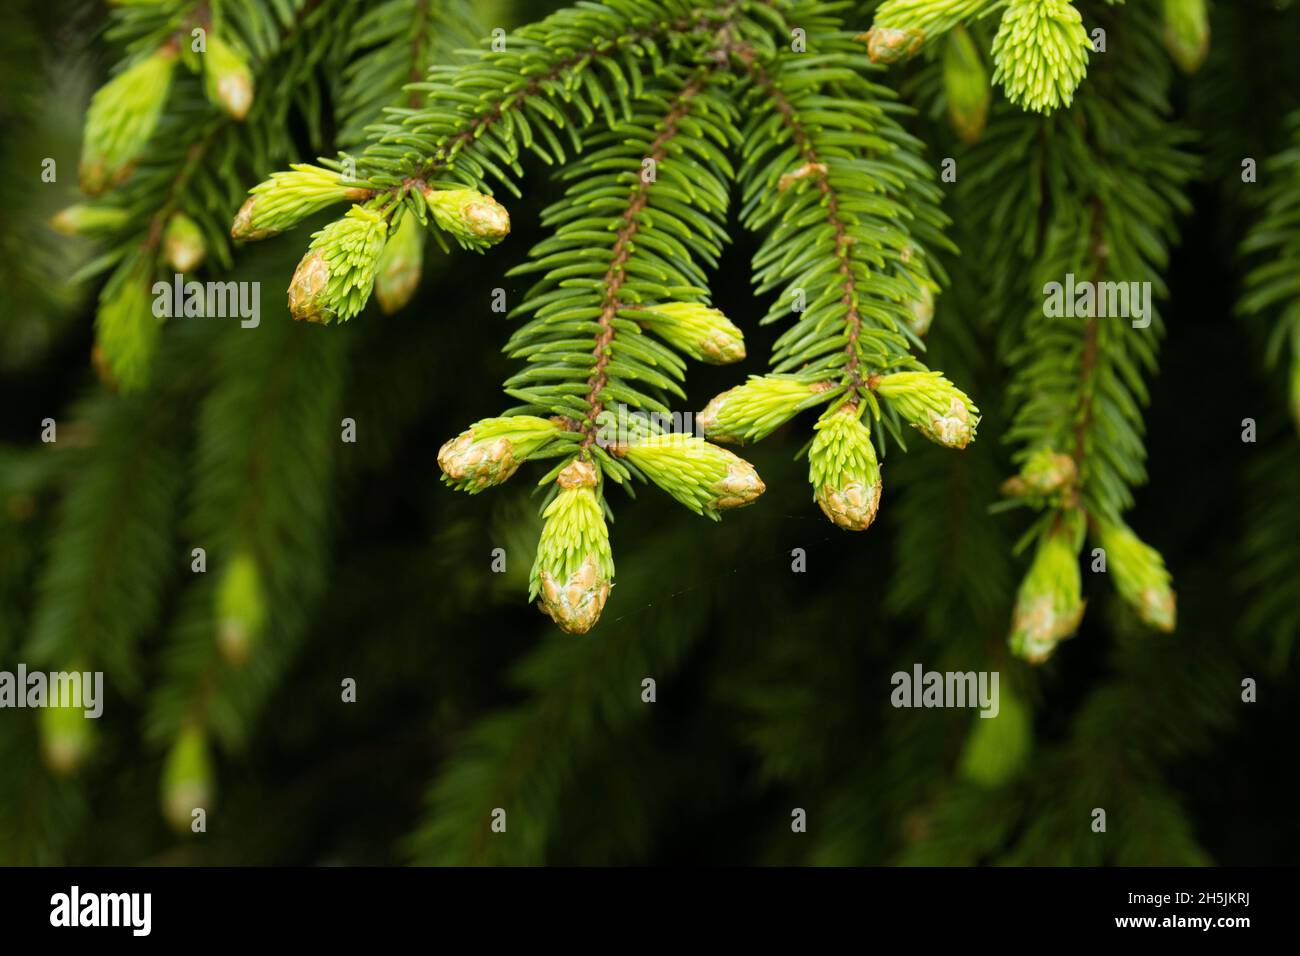 Fresh green needles of an European spruce, Picea abies growing in Estonian boreal forest. Stock Photo